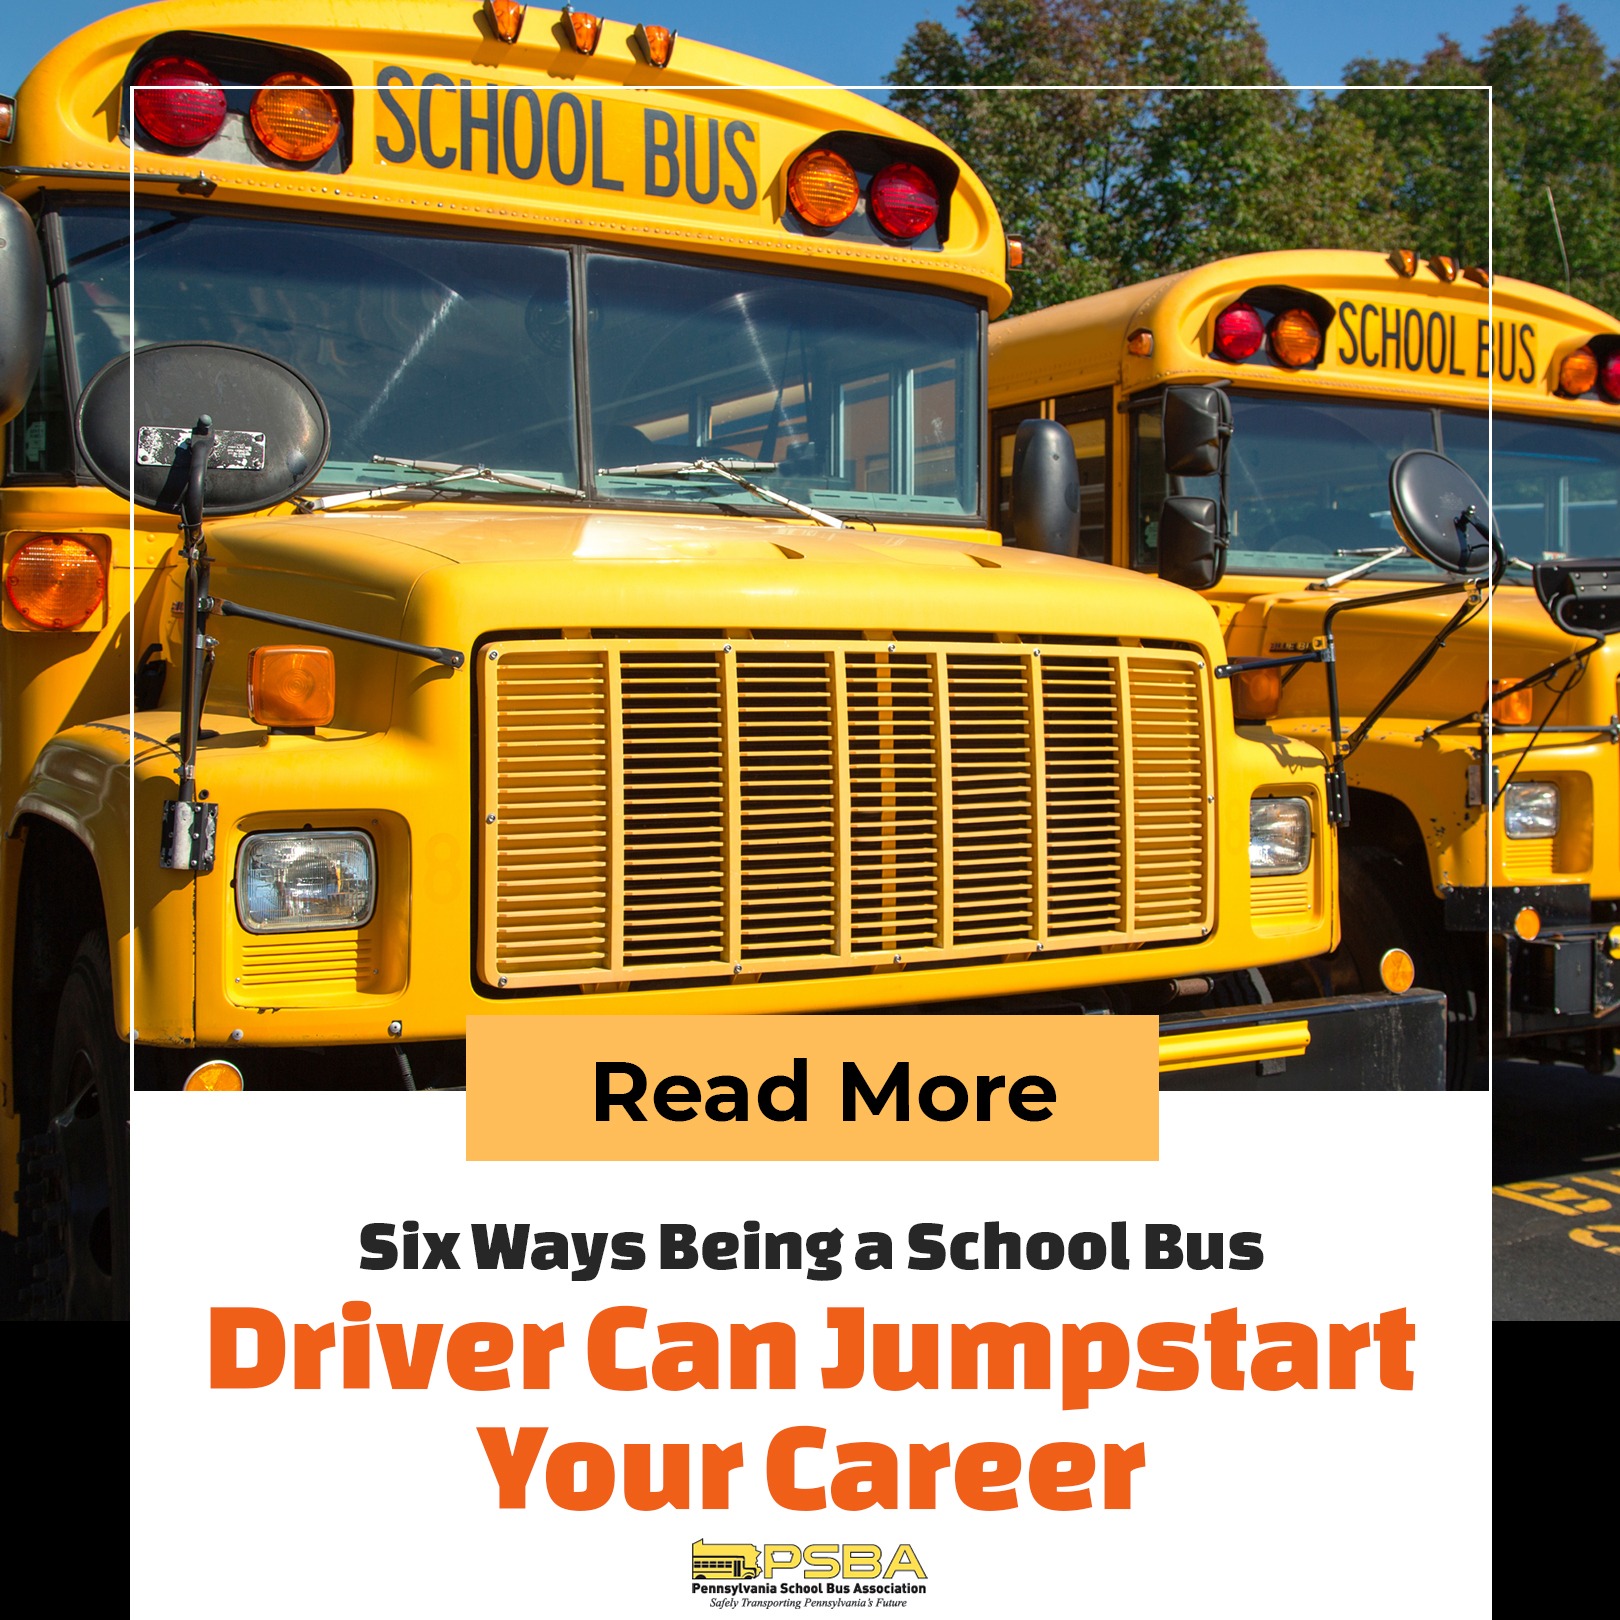 Six Ways Being a School Bus Driver Can Jumpstart Your Career